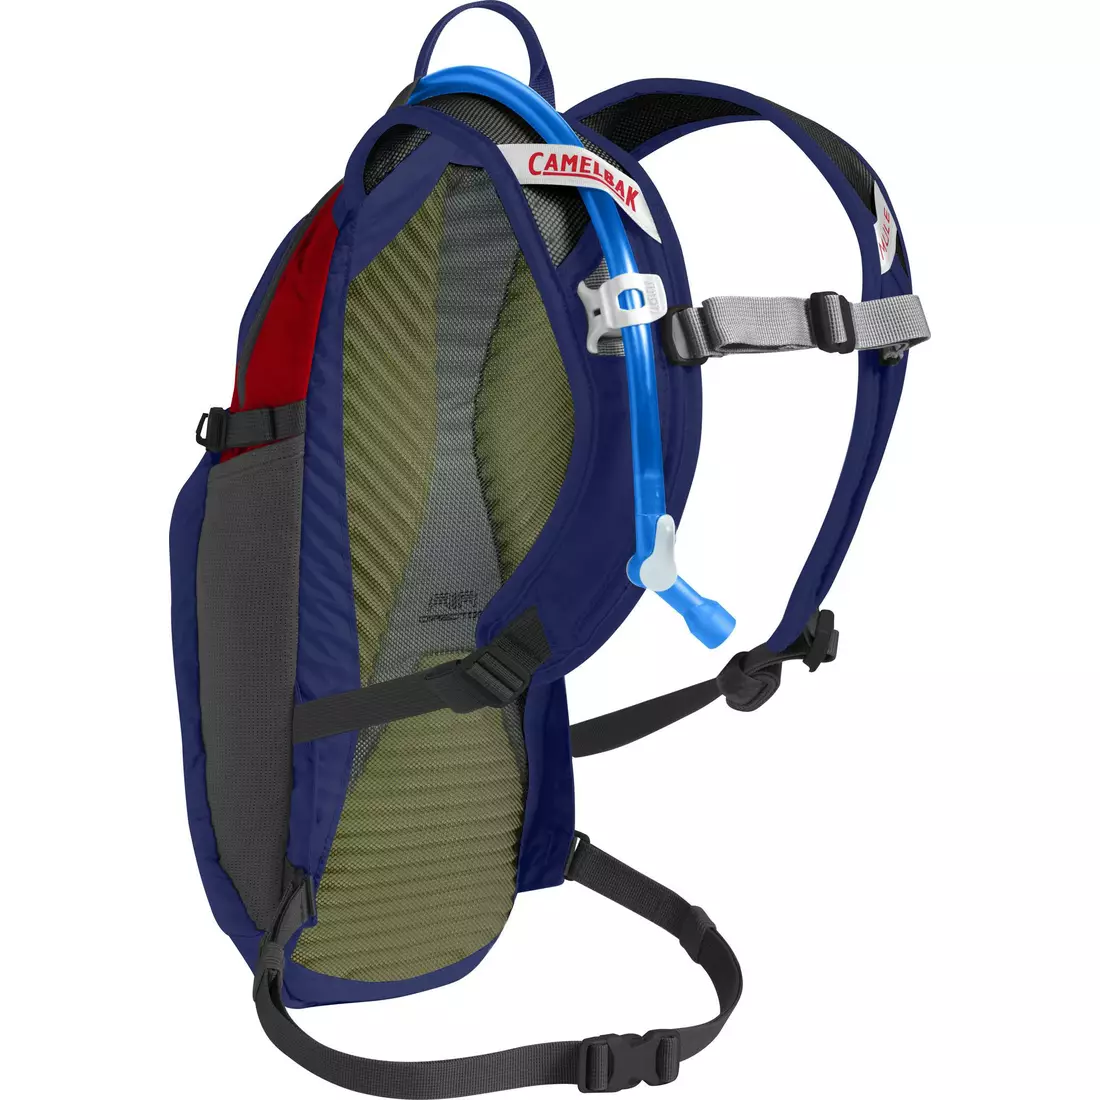 Camelbak SS18 backpack with water bladder Lobo 100oz/ 3L Pitch Blue/Racing Red 1118405000